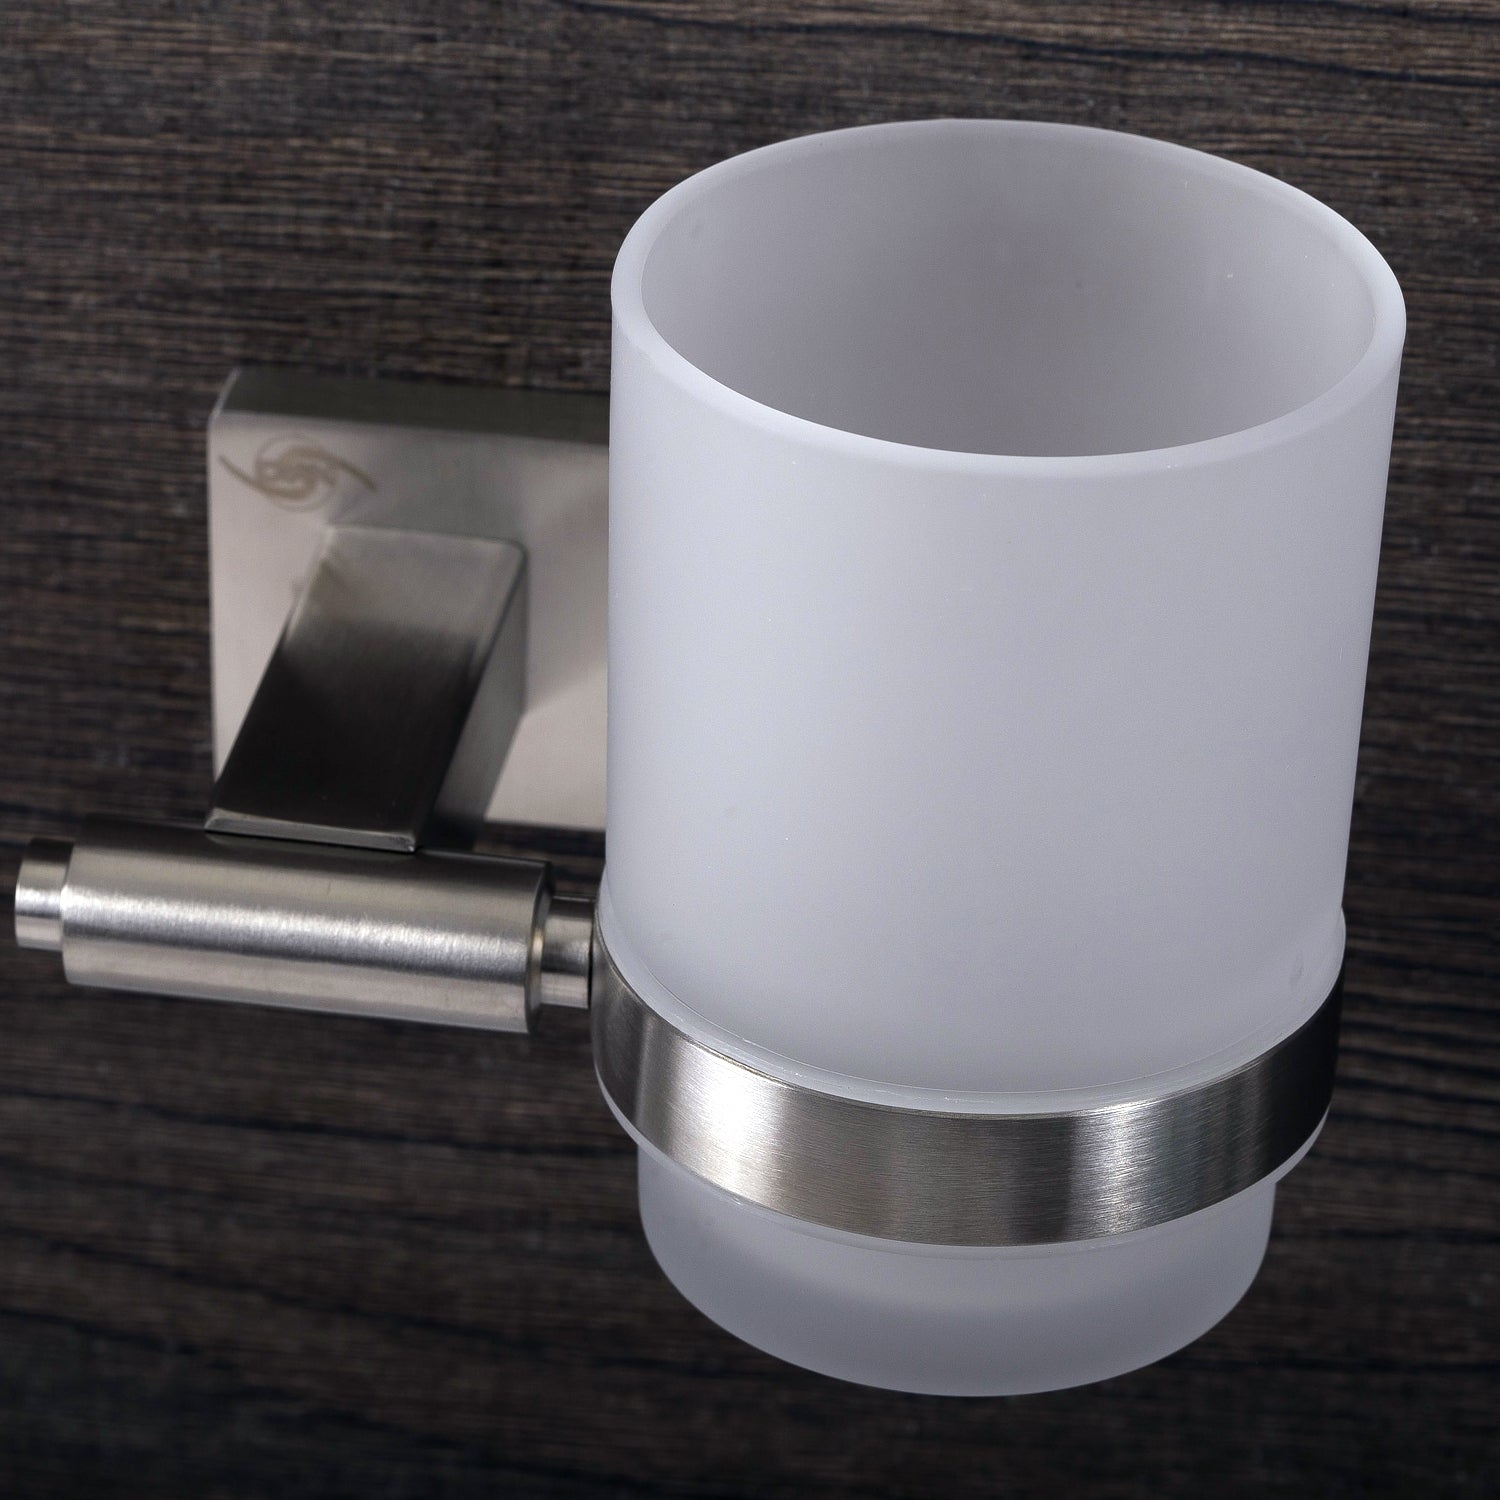 DAX Bathroom Single Tumbler Toothbrush Holder, Wall Mount Stainless Steel with Glass Cup, Polish Finish, 3-3/4 x 3-3/4 x 4-1/2 Inches (DAX-G0106-P)